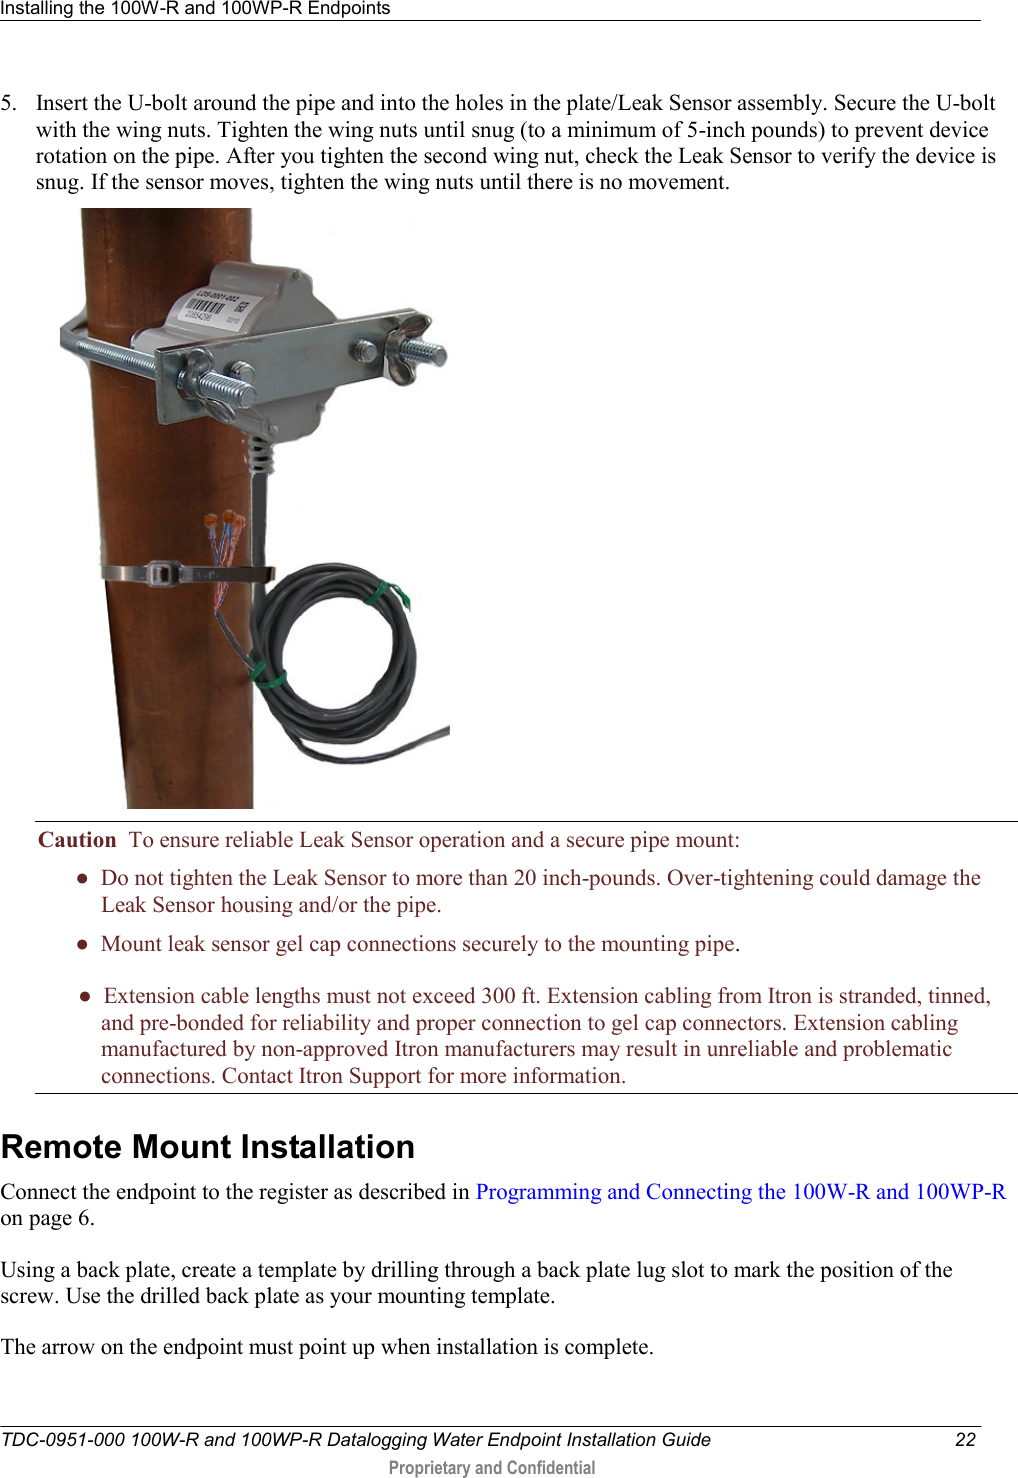 Installing the 100W-R and 100WP-R Endpoints   TDC-0951-000 100W-R and 100WP-R Datalogging Water Endpoint Installation Guide  22  Proprietary and Confidential    5. Insert the U-bolt around the pipe and into the holes in the plate/Leak Sensor assembly. Secure the U-bolt with the wing nuts. Tighten the wing nuts until snug (to a minimum of 5-inch pounds) to prevent device rotation on the pipe. After you tighten the second wing nut, check the Leak Sensor to verify the device is snug. If the sensor moves, tighten the wing nuts until there is no movement.   Caution  To ensure reliable Leak Sensor operation and a secure pipe mount: ●  Do not tighten the Leak Sensor to more than 20 inch-pounds. Over-tightening could damage the            Leak Sensor housing and/or the pipe.   ●  Mount leak sensor gel cap connections securely to the mounting pipe.          ●  Extension cable lengths must not exceed 300 ft. Extension cabling from Itron is stranded, tinned,             and pre-bonded for reliability and proper connection to gel cap connectors. Extension cabling            manufactured by non-approved Itron manufacturers may result in unreliable and problematic            connections. Contact Itron Support for more information.  Remote Mount Installation Connect the endpoint to the register as described in Programming and Connecting the 100W-R and 100WP-R   on page 6. Using a back plate, create a template by drilling through a back plate lug slot to mark the position of the screw. Use the drilled back plate as your mounting template. The arrow on the endpoint must point up when installation is complete.   